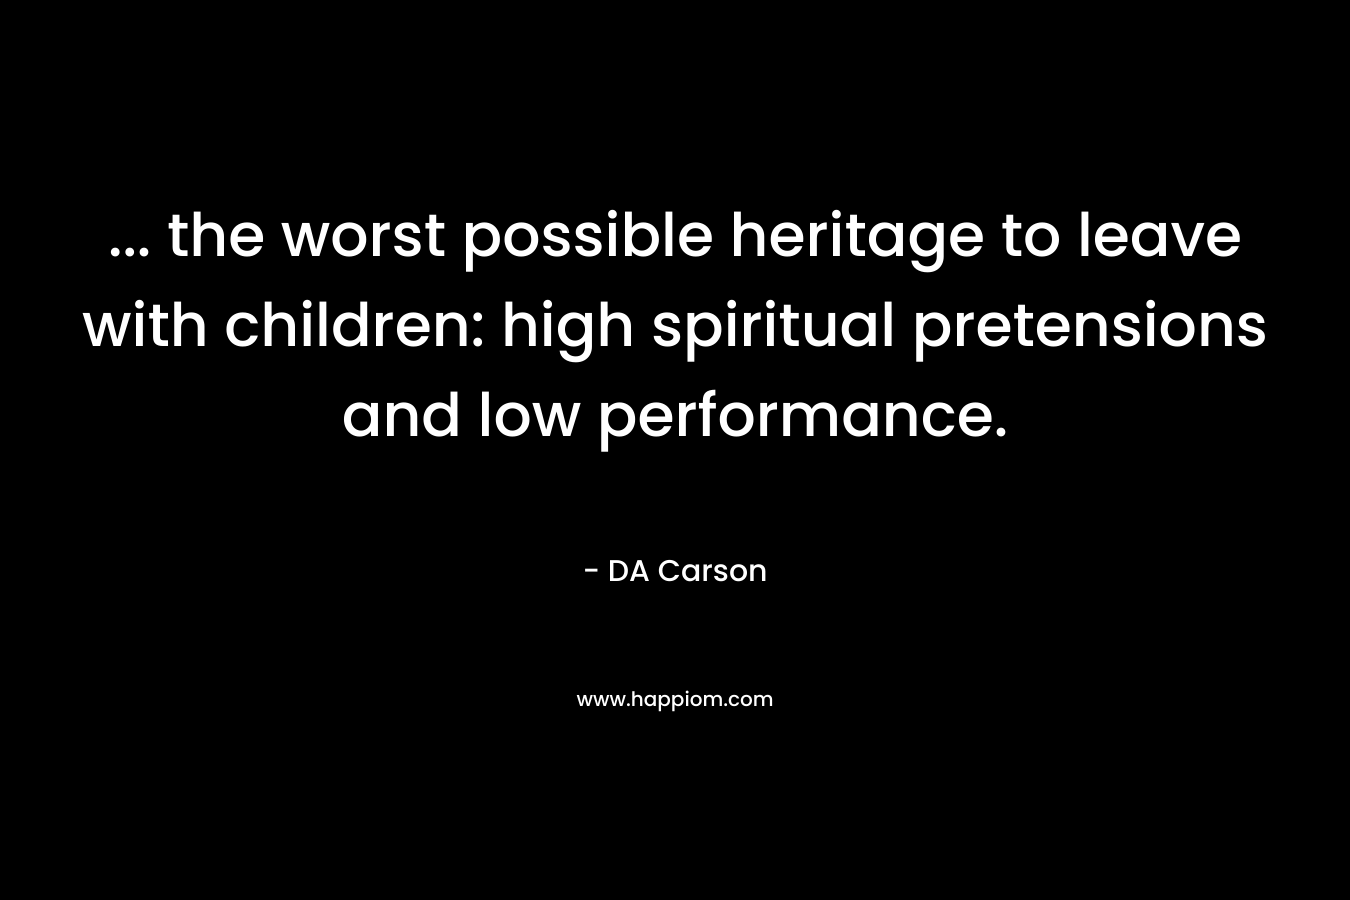 ... the worst possible heritage to leave with children: high spiritual pretensions and low performance.